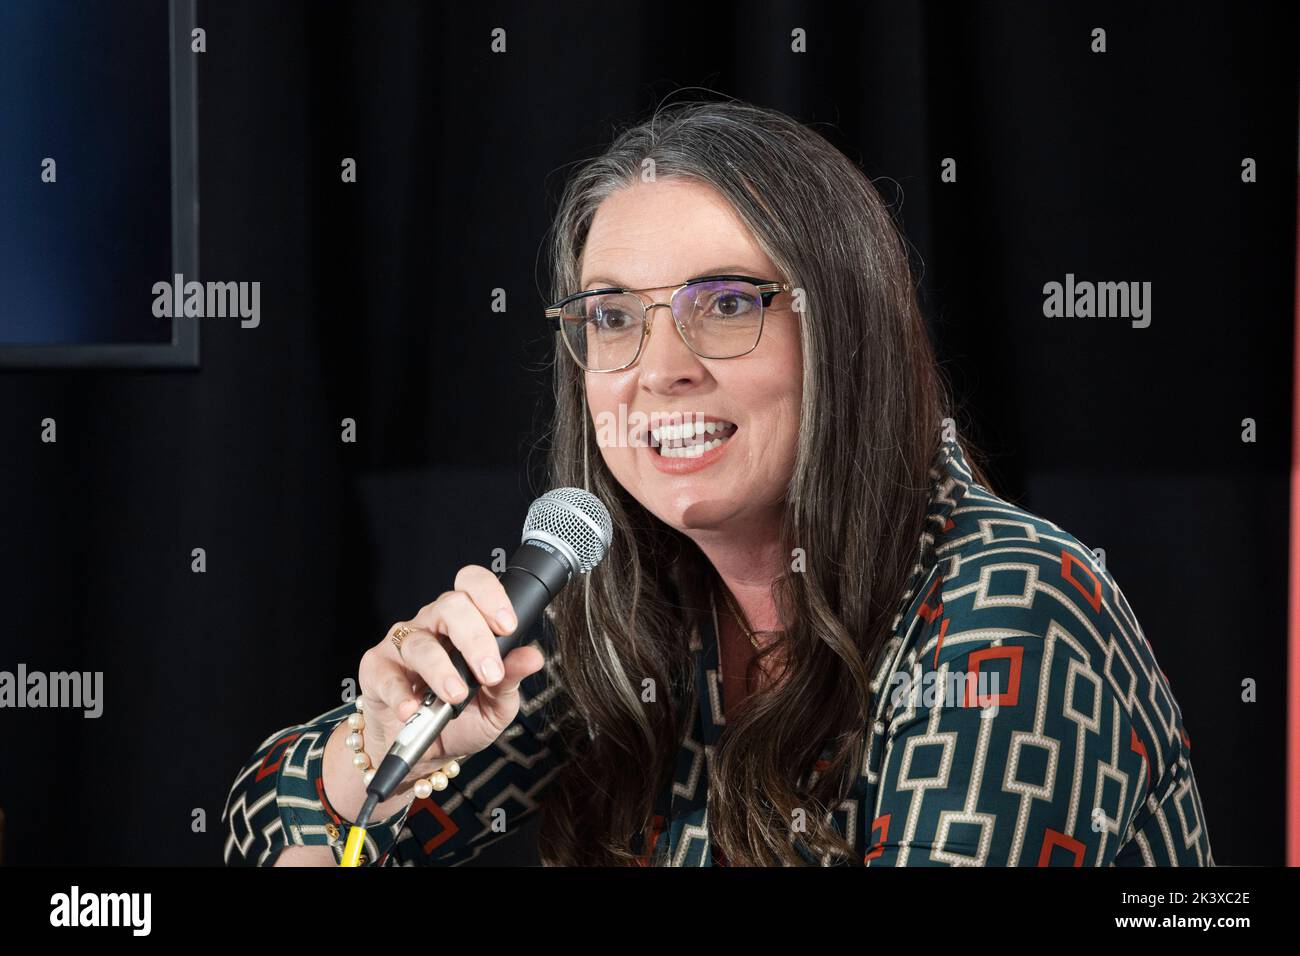 Chair of the Dept. of Psychiatry at Texas Tech School of Medicine SARAH WAKEFIELD during an interview session at the annual Texas Tribune Festival in downtown Austin on September 24, 2022. Stock Photo